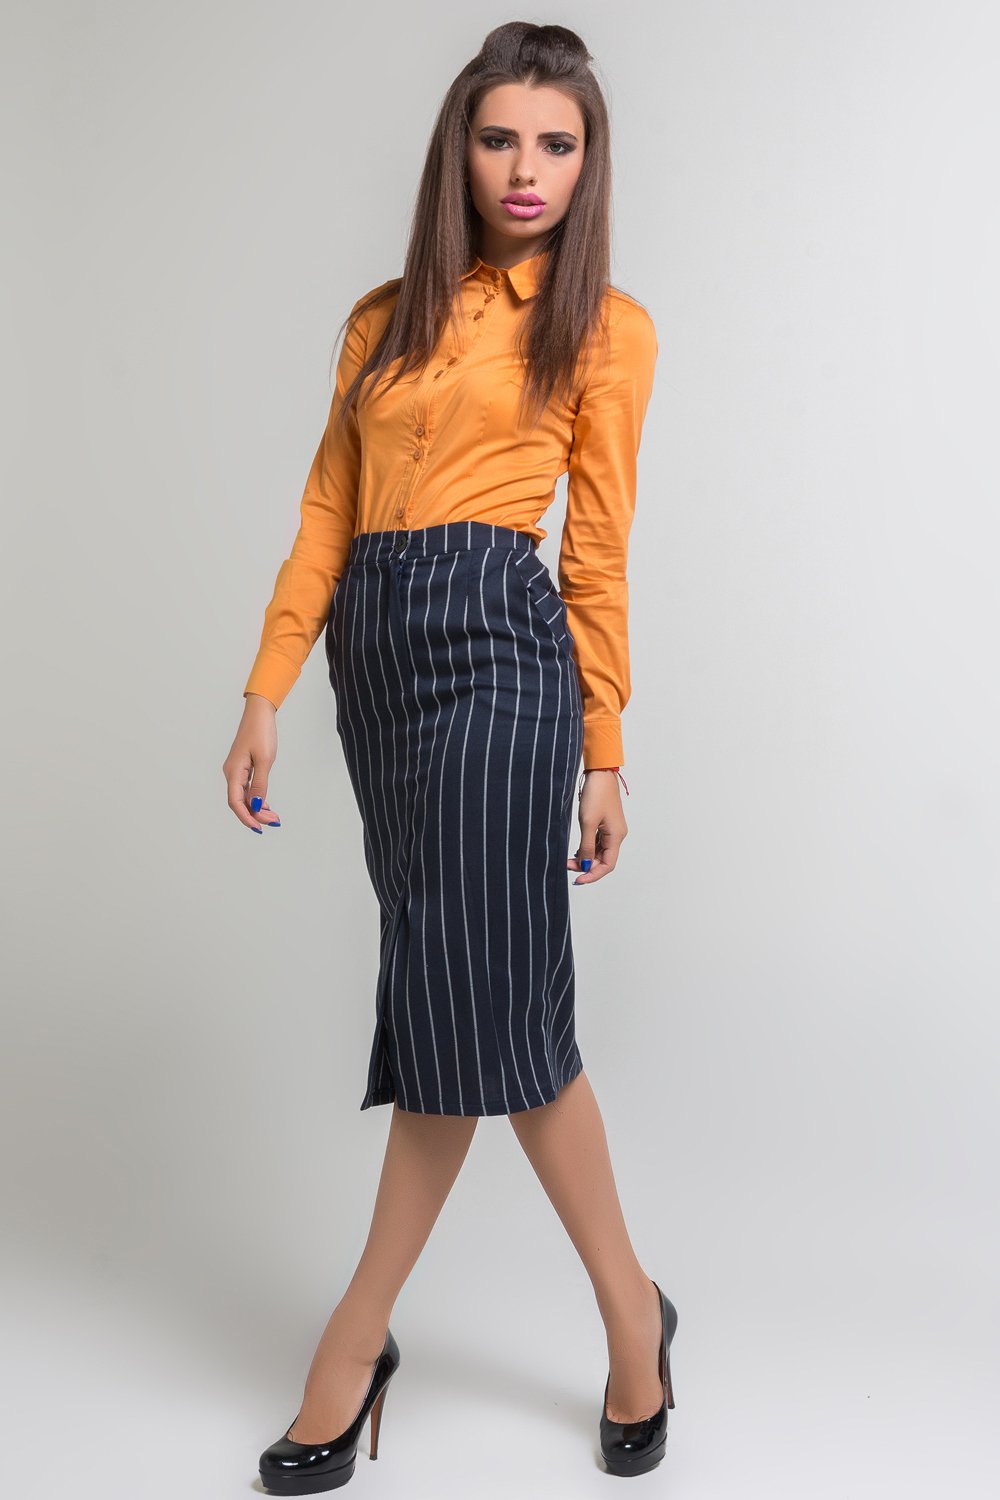 Midi length striped skirt with pockets and front cutout.